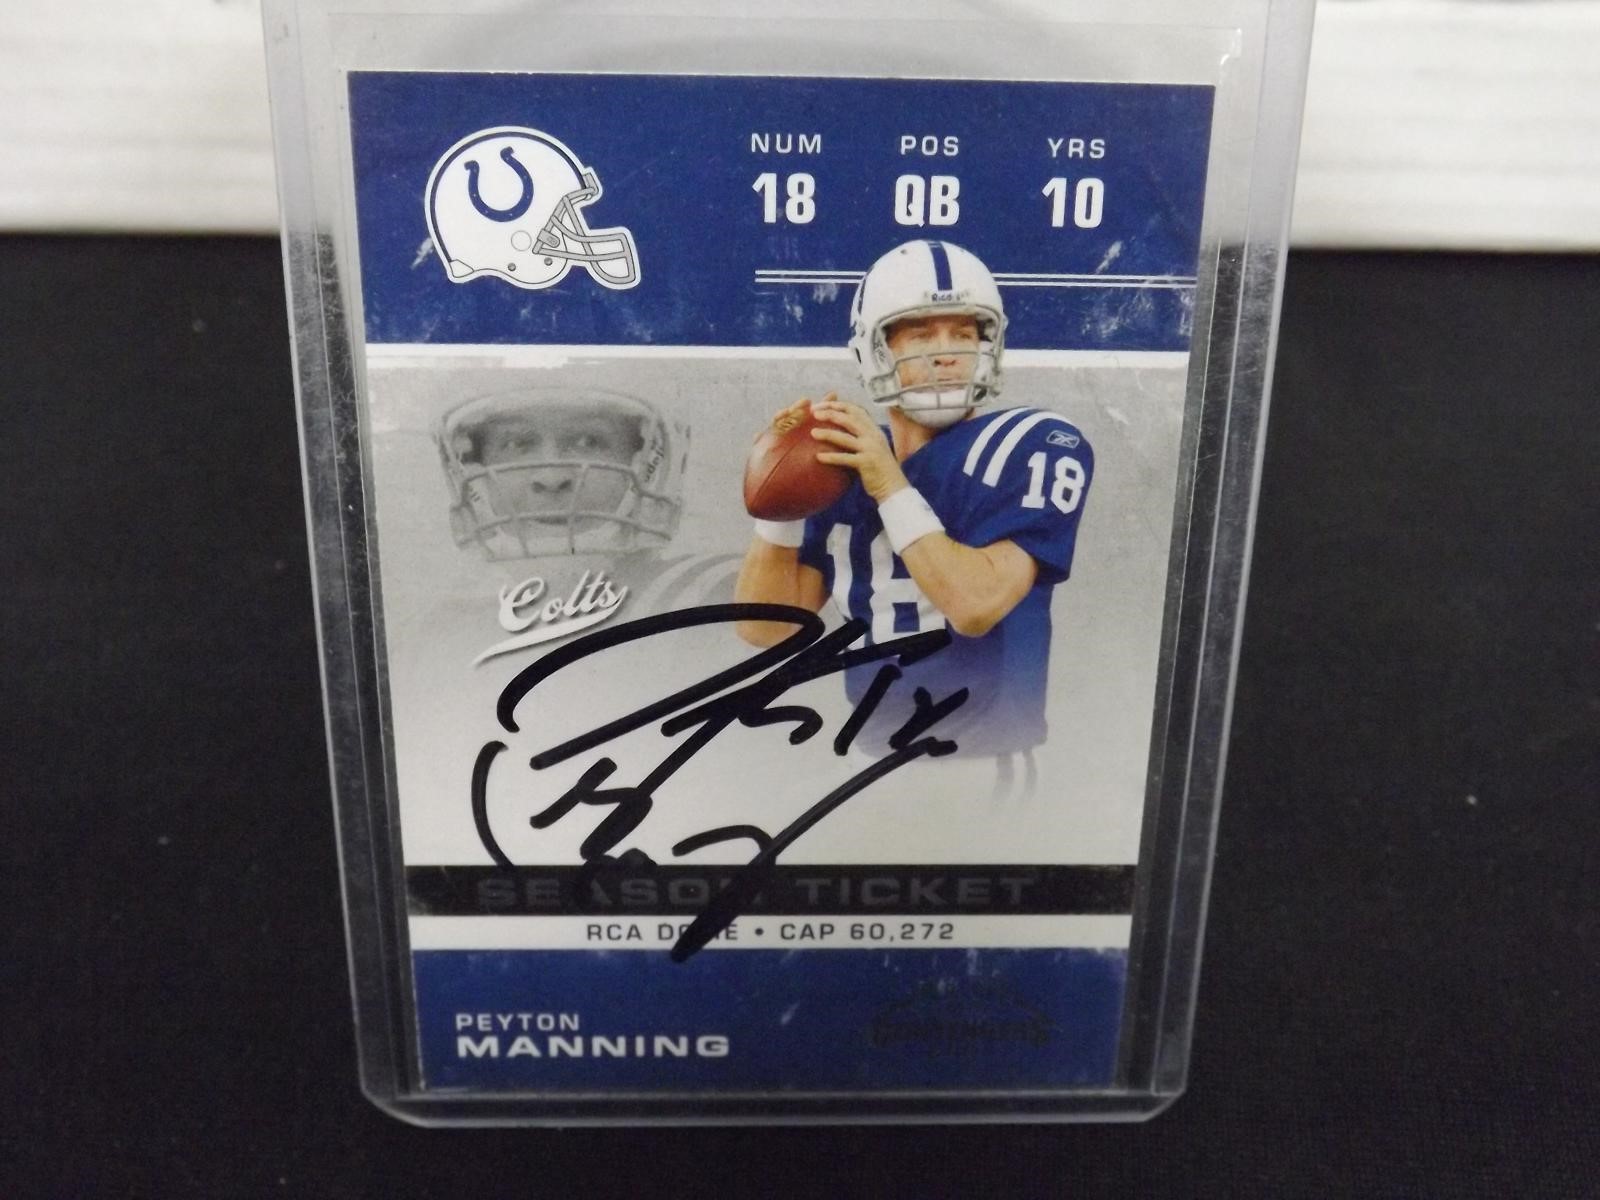 2007 CONTENDERS PEYTON MANNING AUTOGRAPH